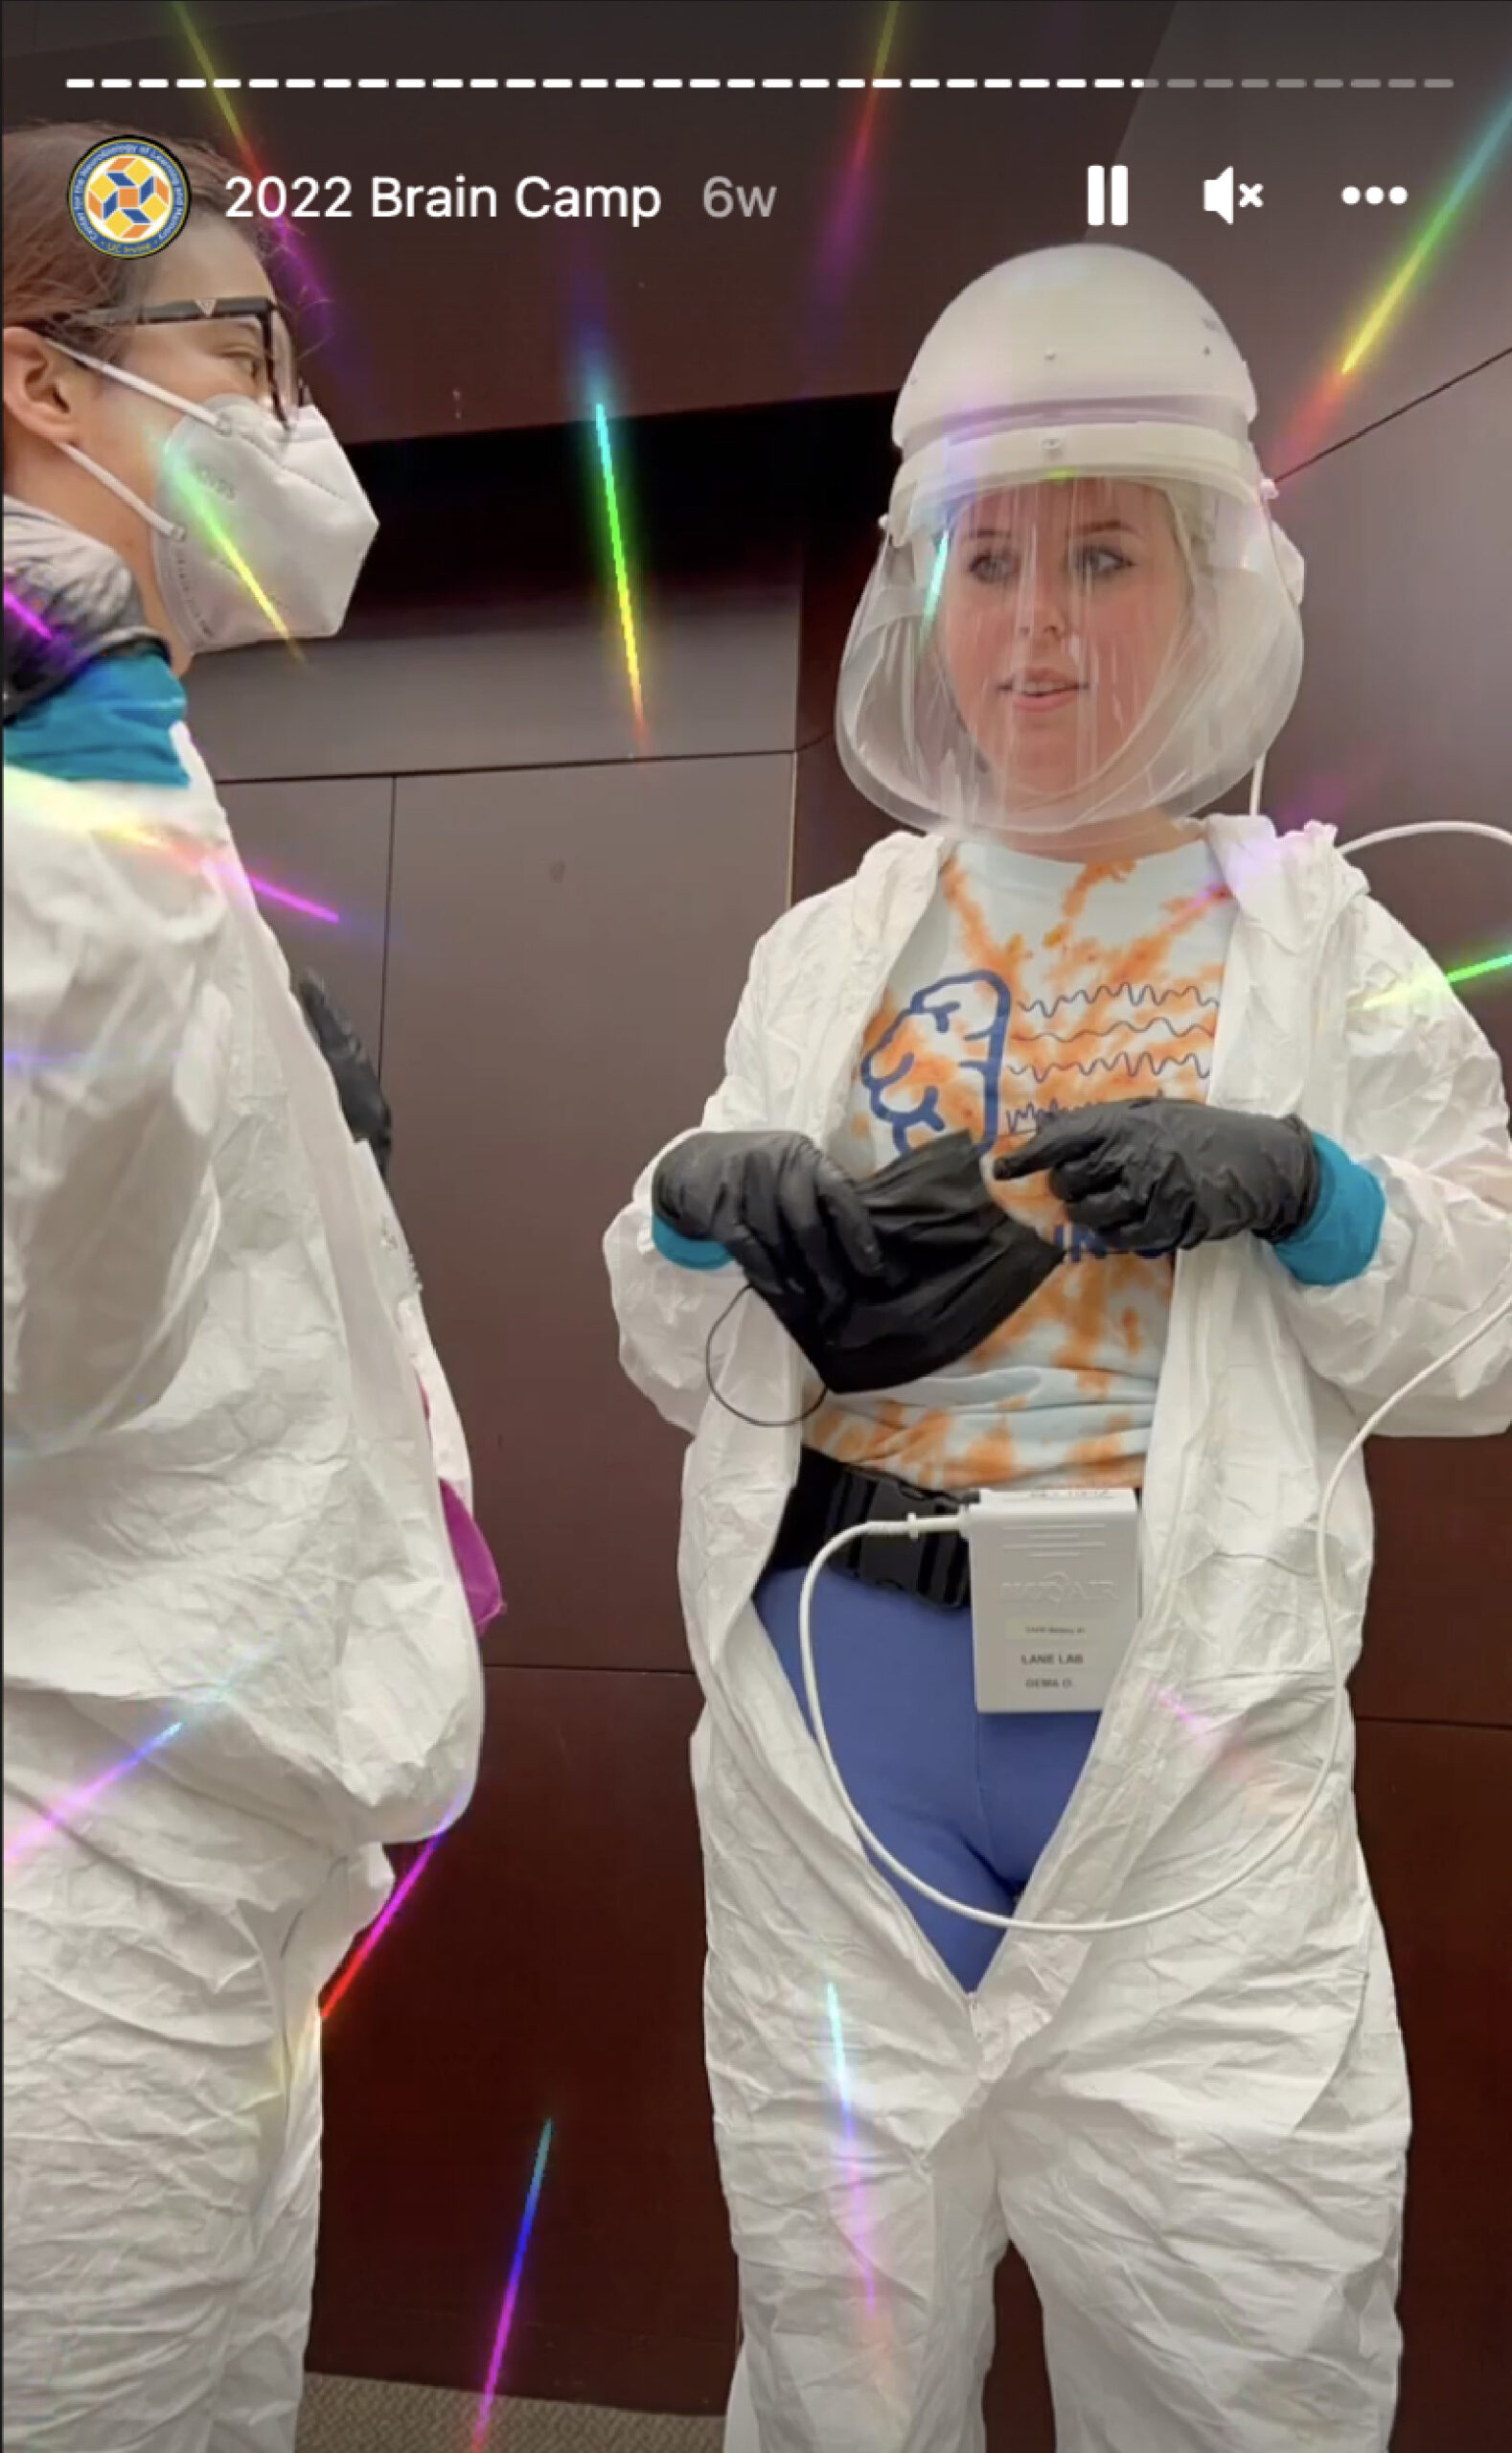 UCI Brain Camp student suits up to participate in hands-on workshop experience